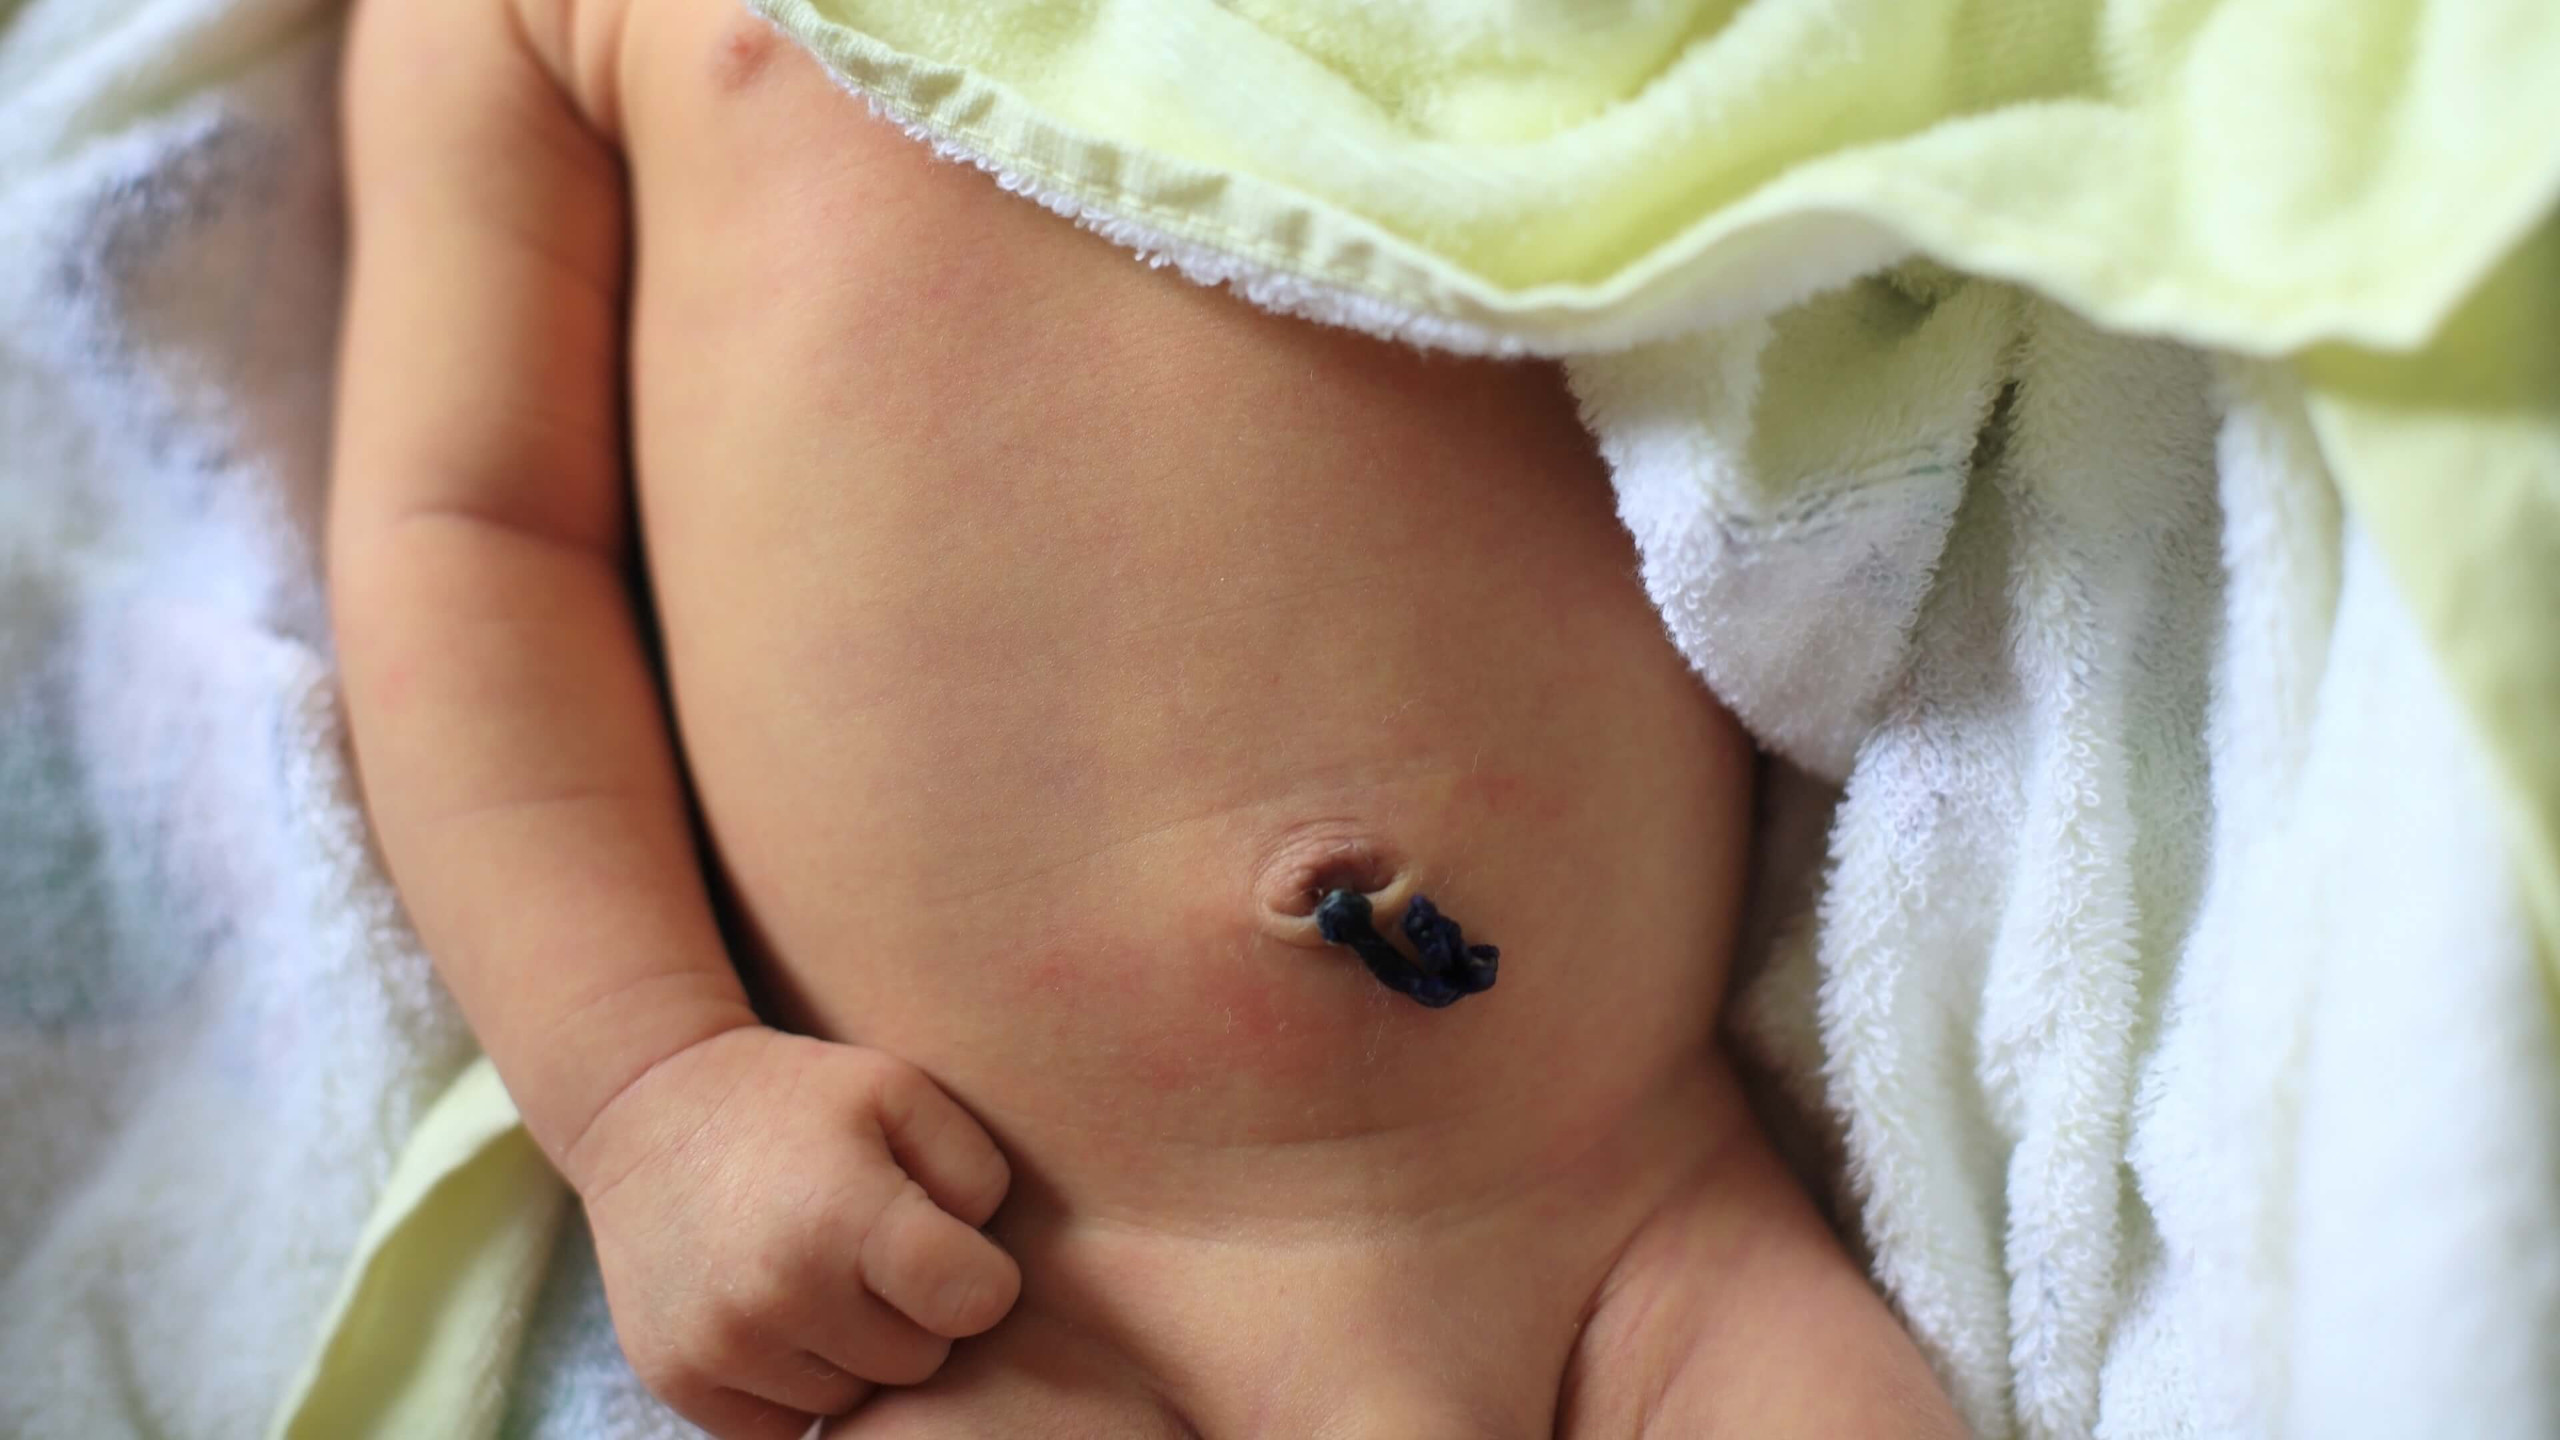 What To Do If Your Baby's Umbilical Cord is Bleeding